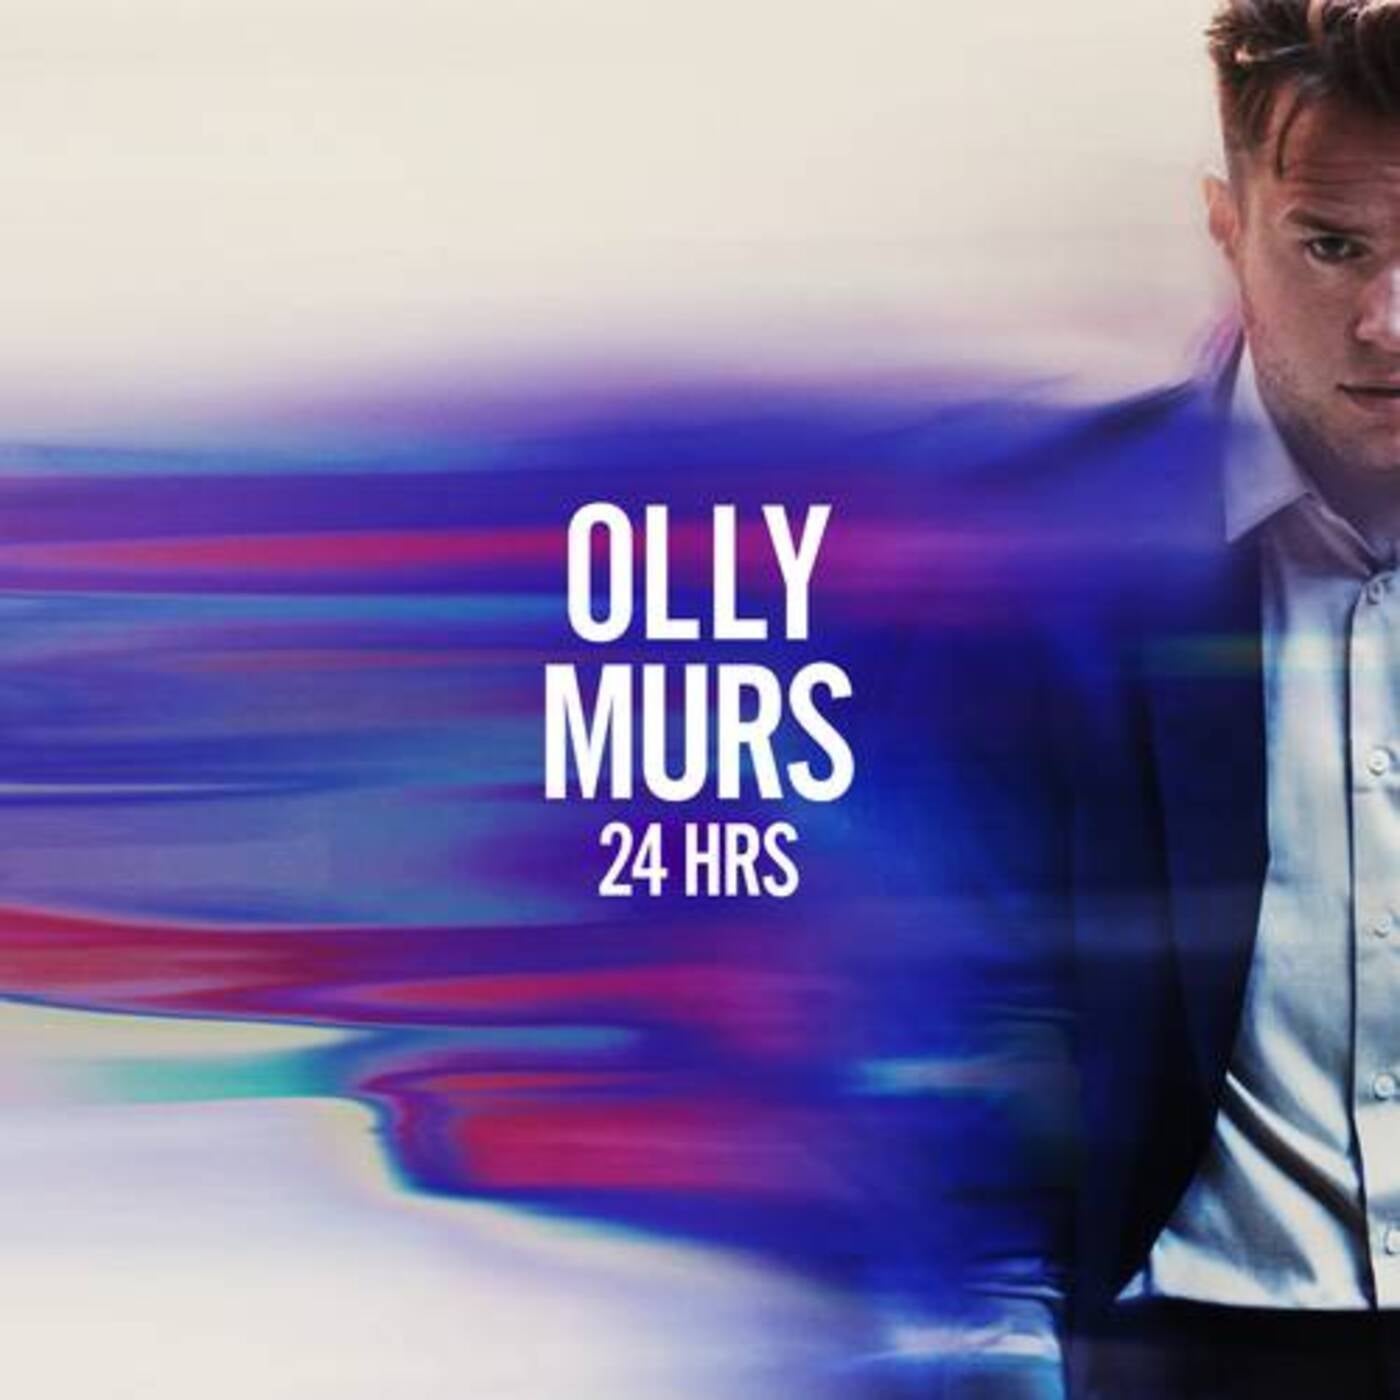 Marry Me by Olly Murs on Beatsource